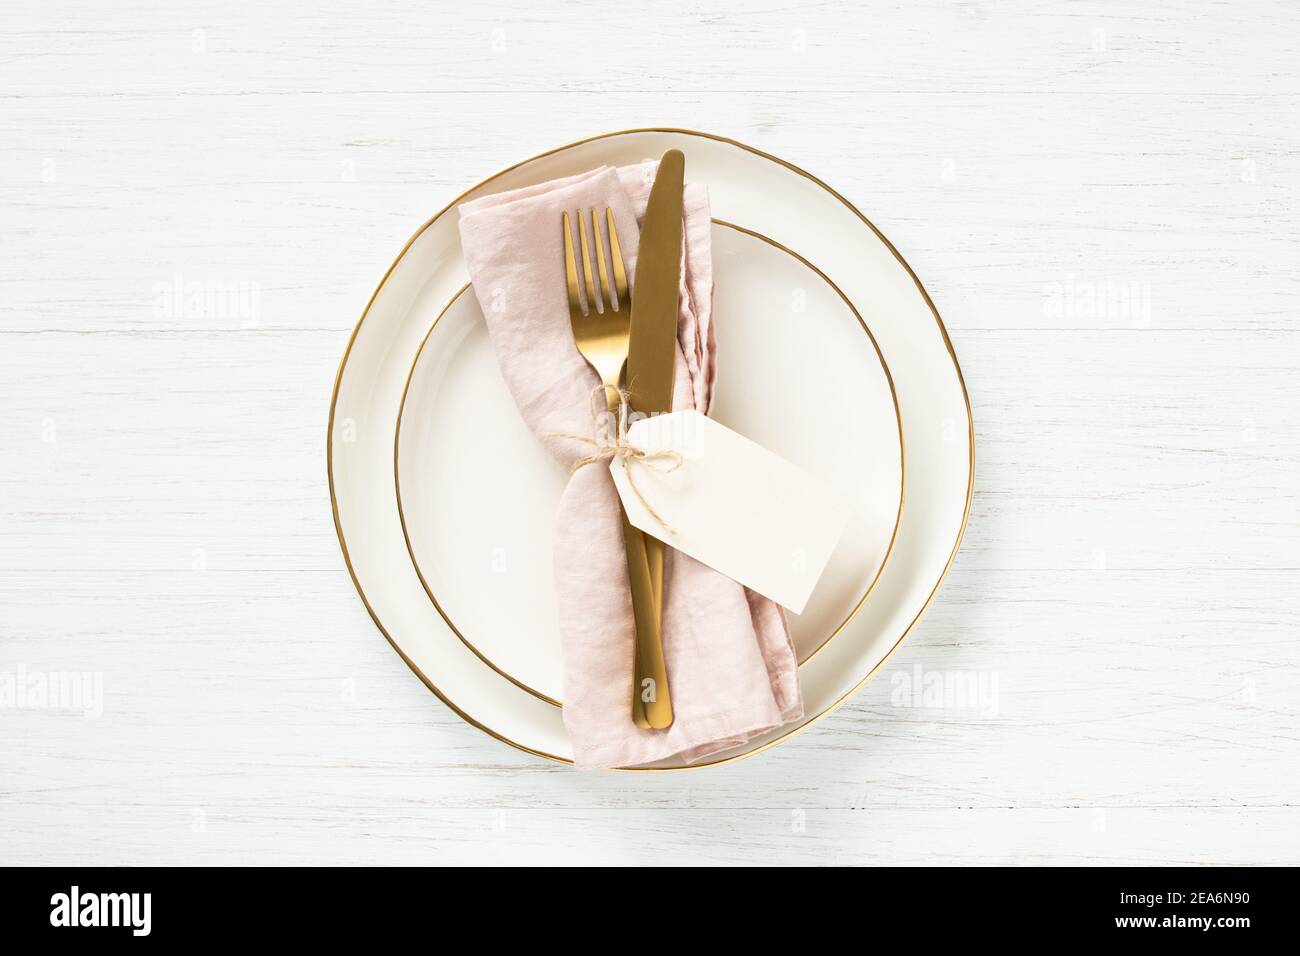 Golden rim plates and golden cutlery on pink napkin with tag on white table. Top view. Stock Photo